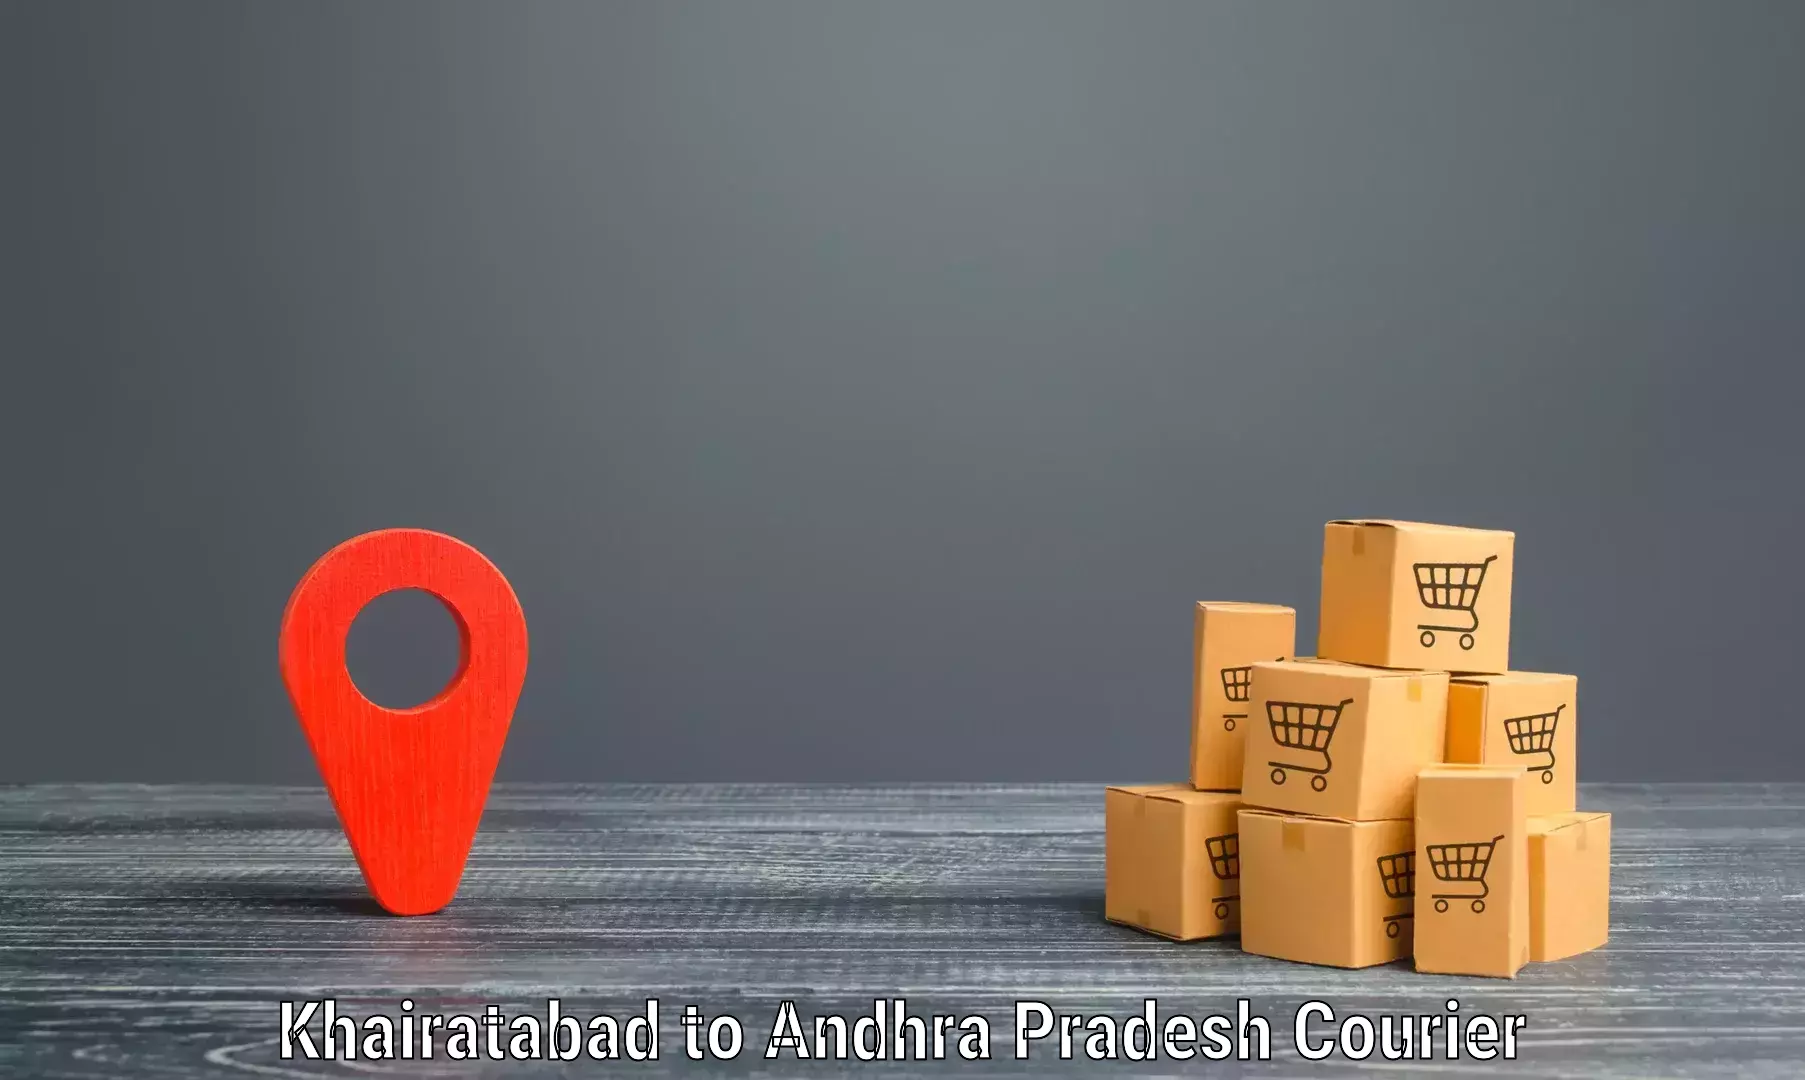 Local delivery service Khairatabad to Galiveedu